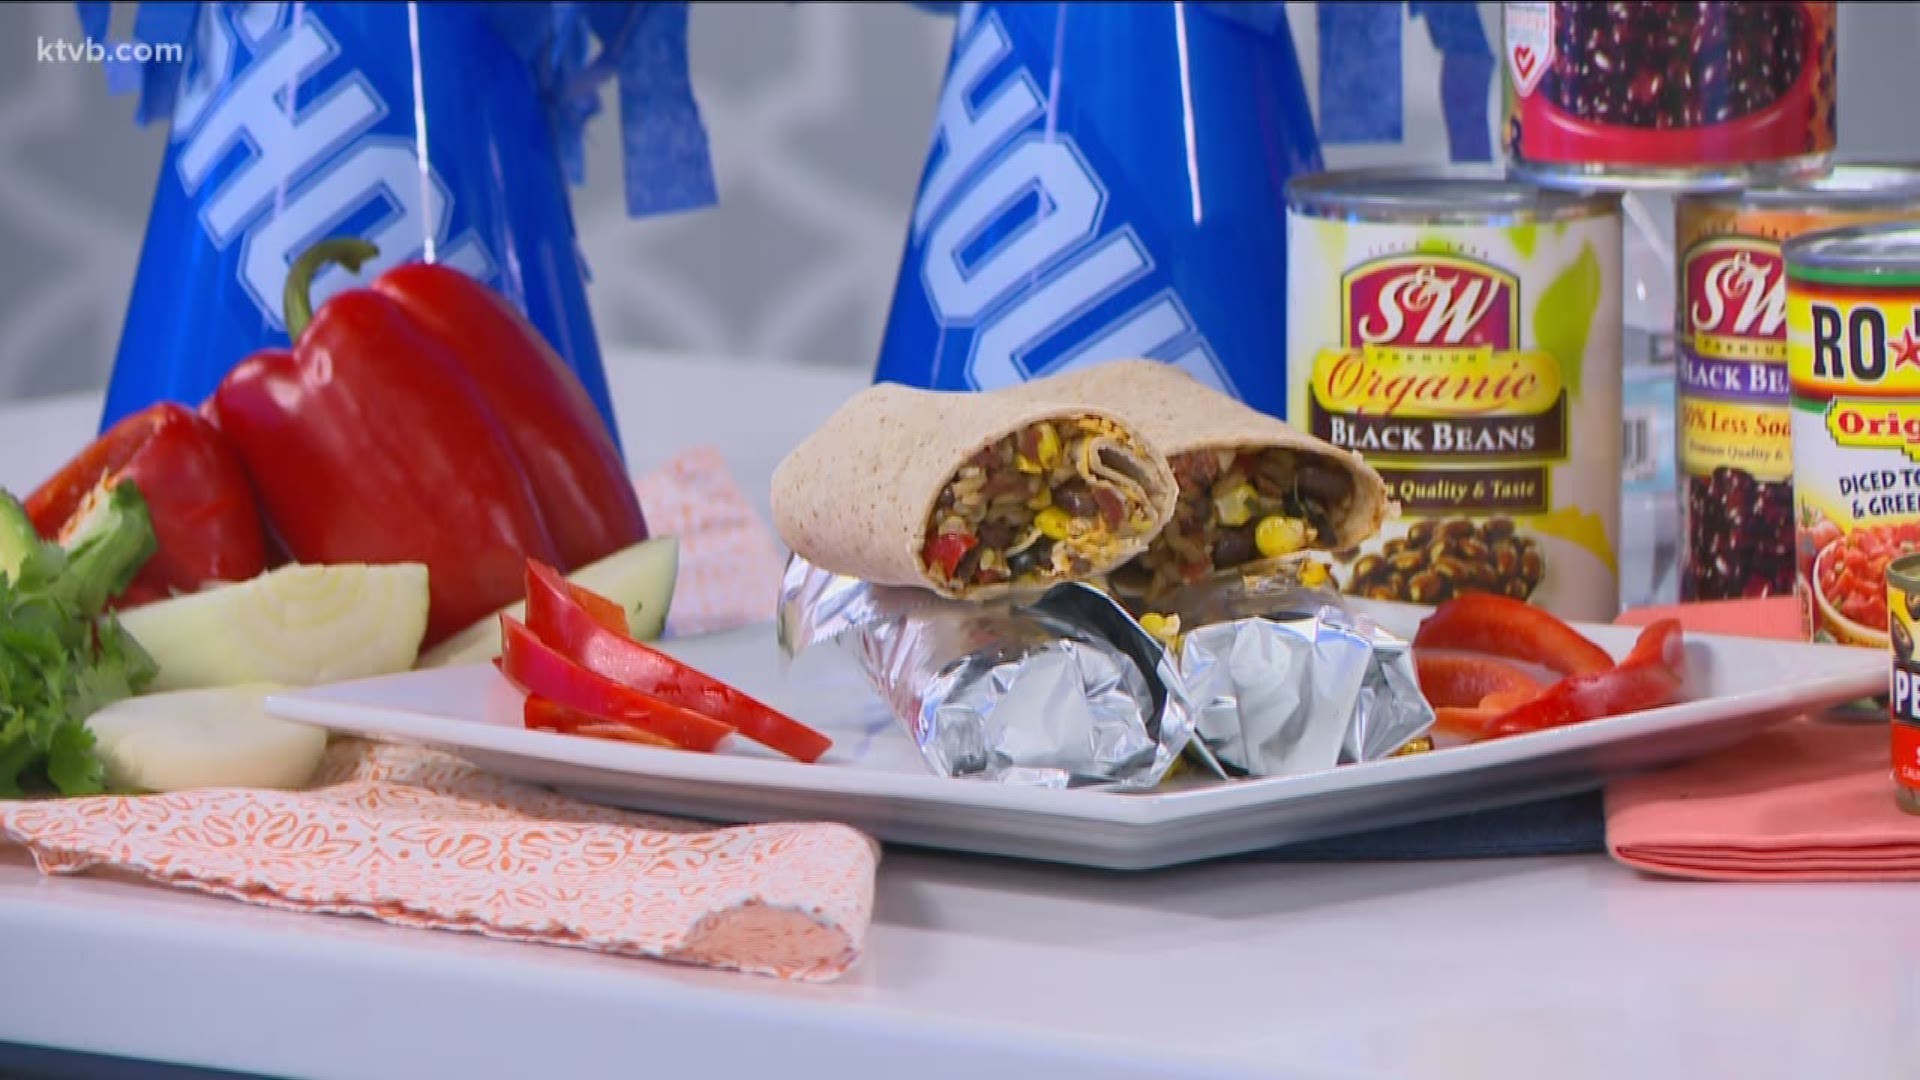 During football gameday, finger foods are always a great choice. In this week's KTVB Kitchen, find out how to make black bean chipotle burritos.